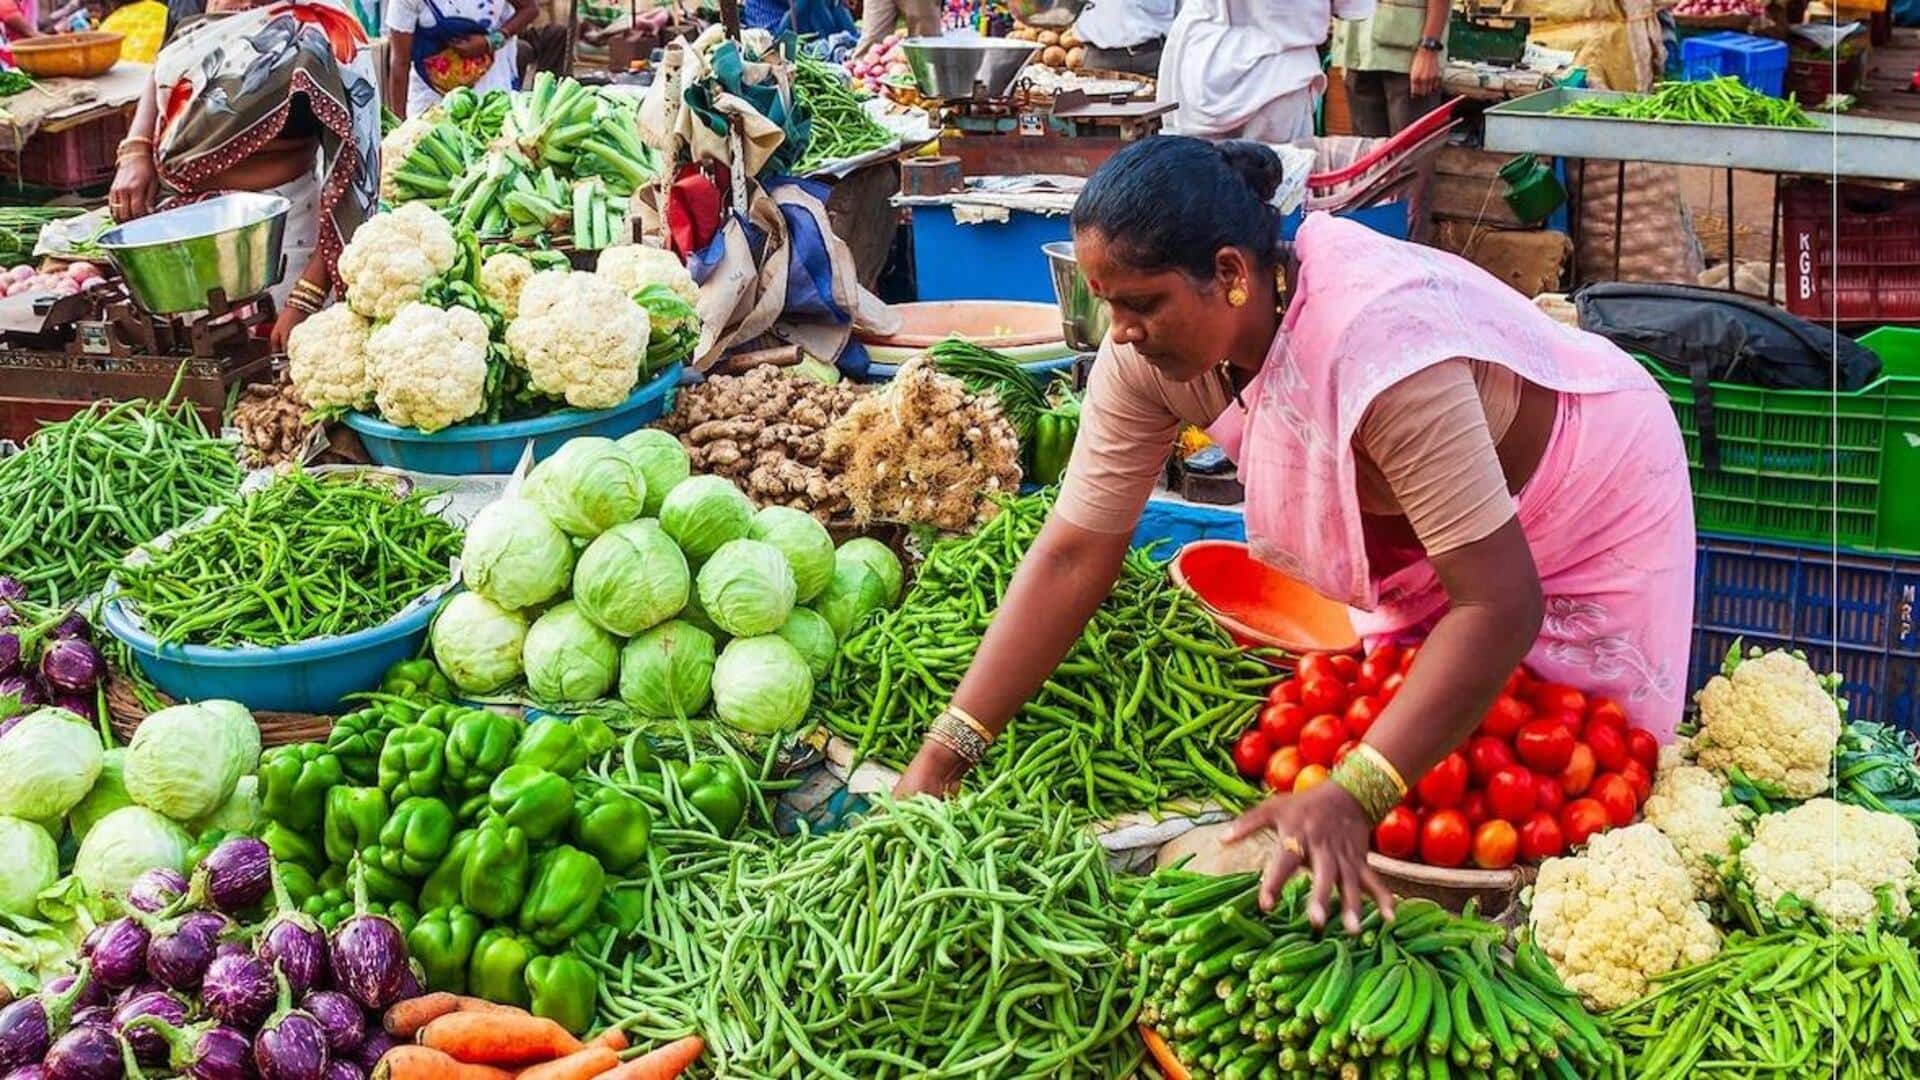 Retail inflation drops to 5-month low of 4.87% in October